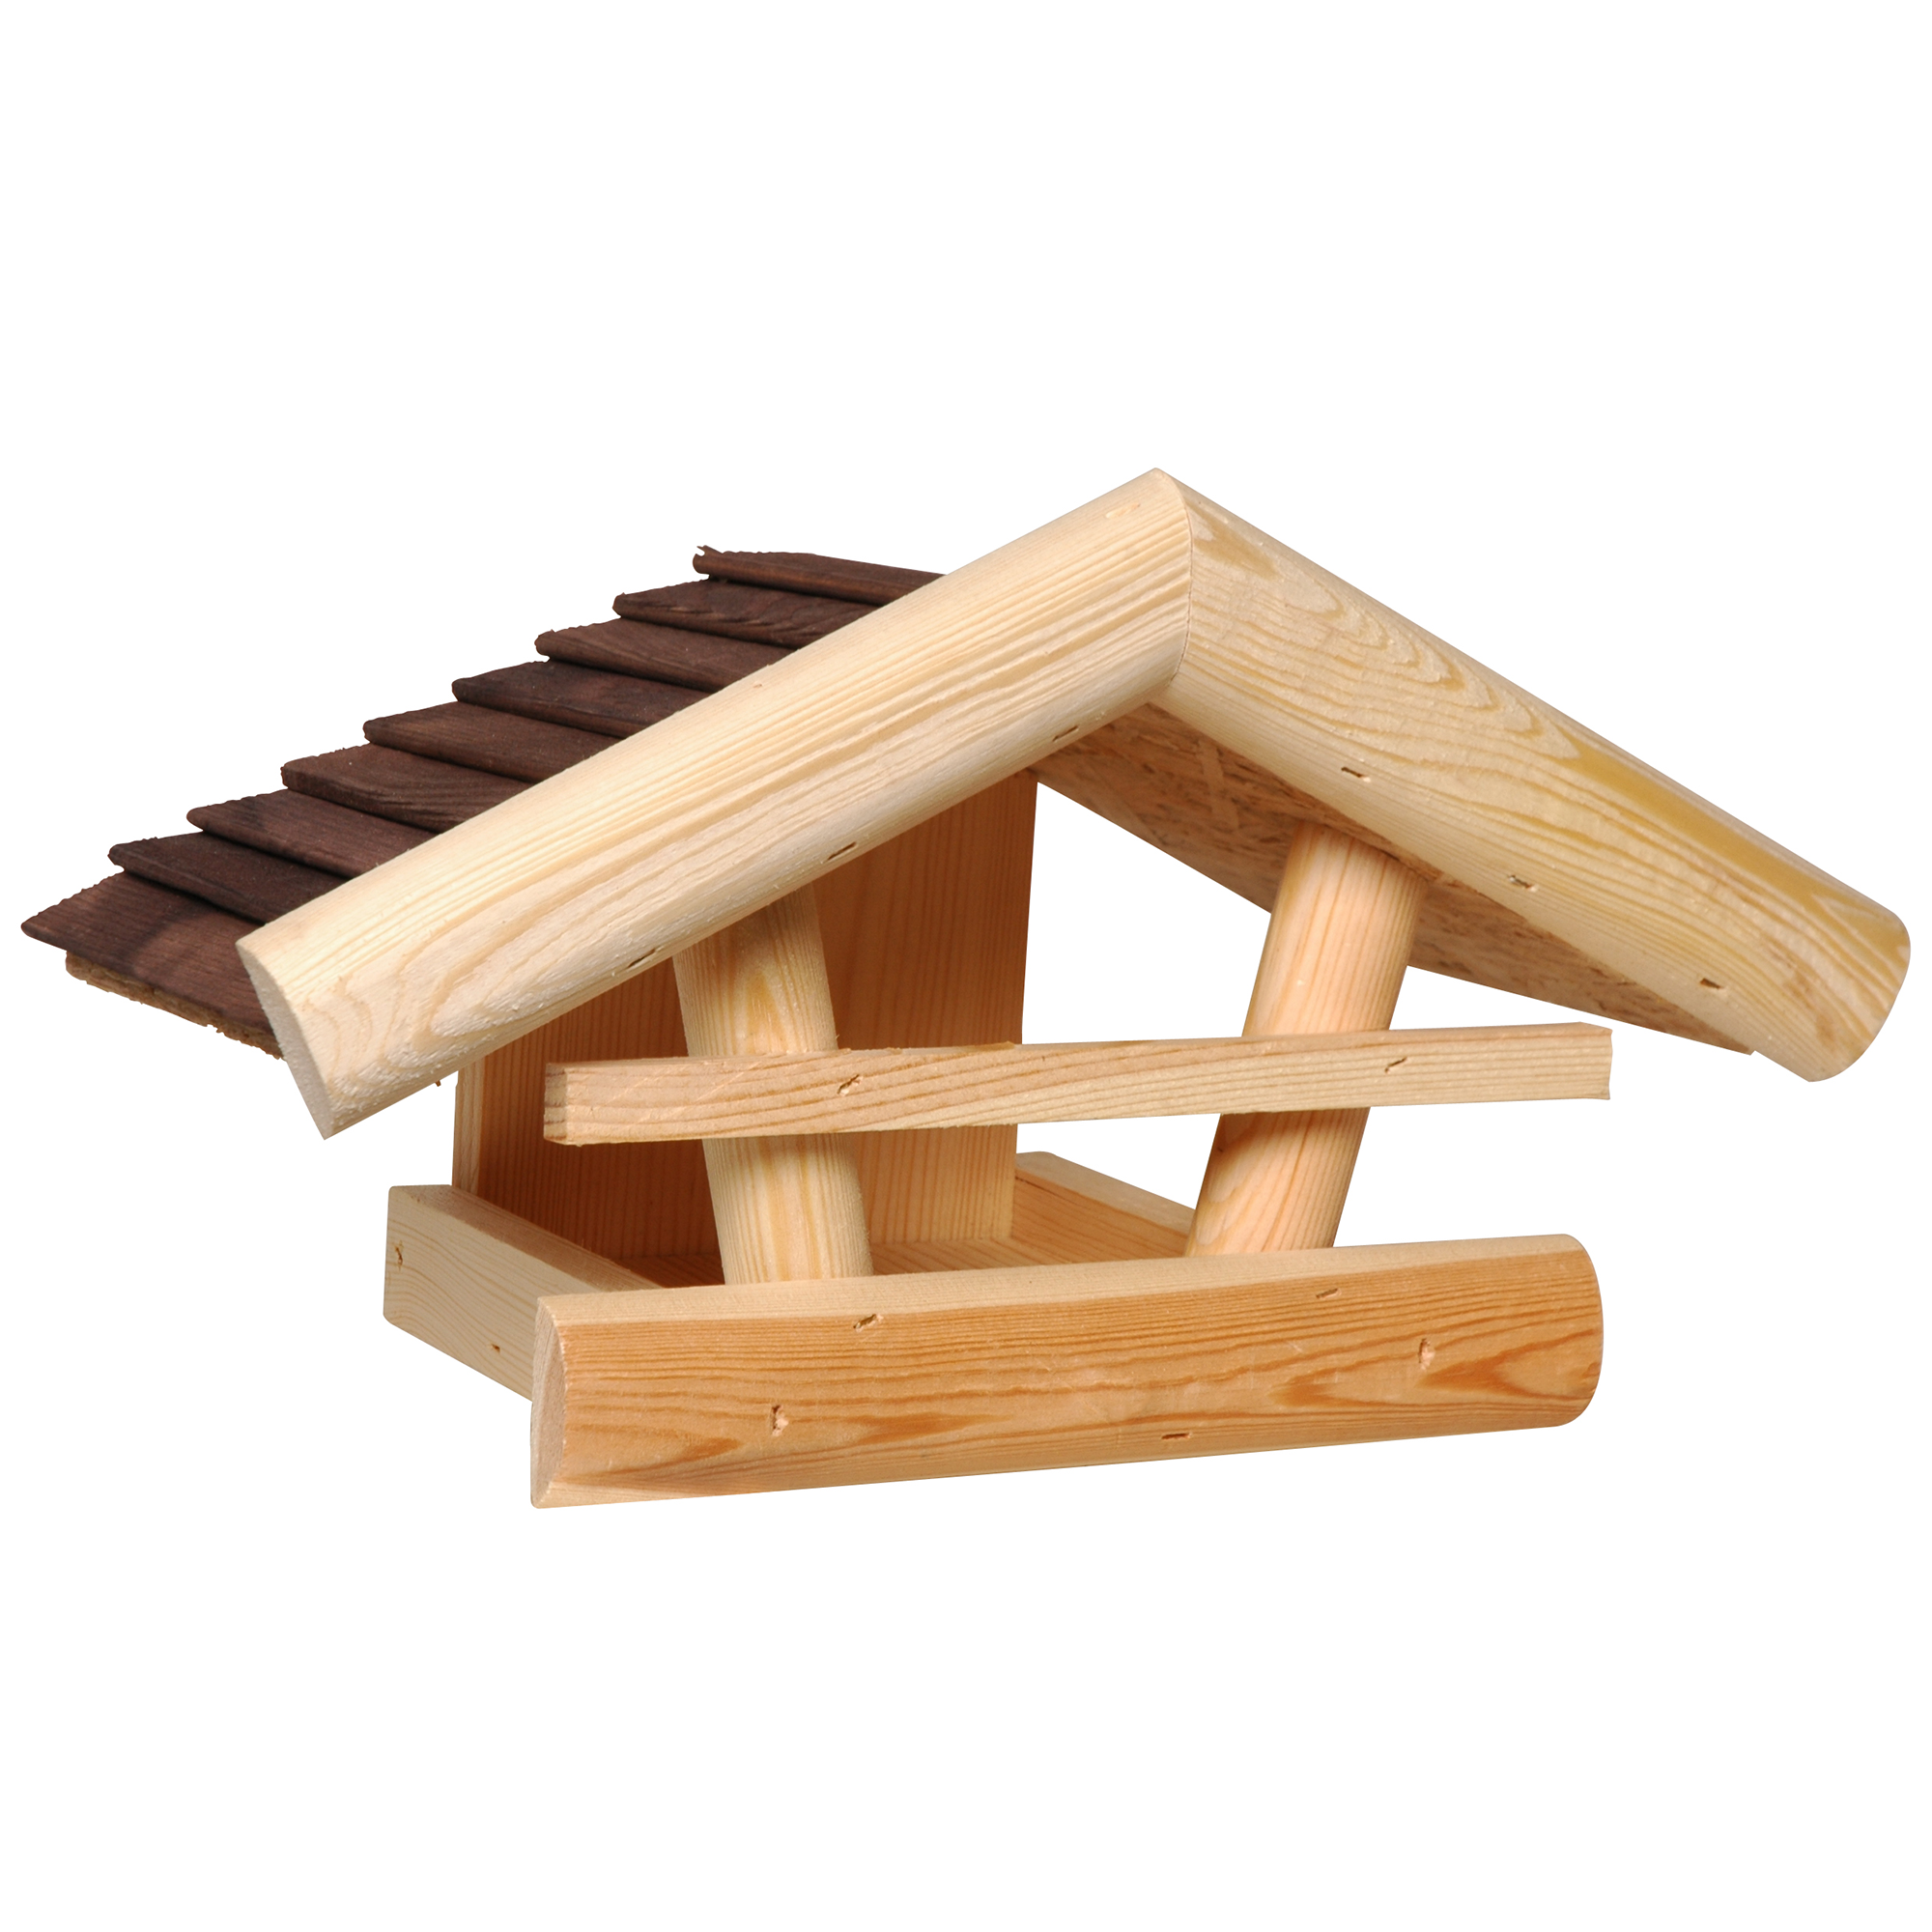 Vogelfutterhaus mit Holzdach 36 x 20 x 20 cm + product picture